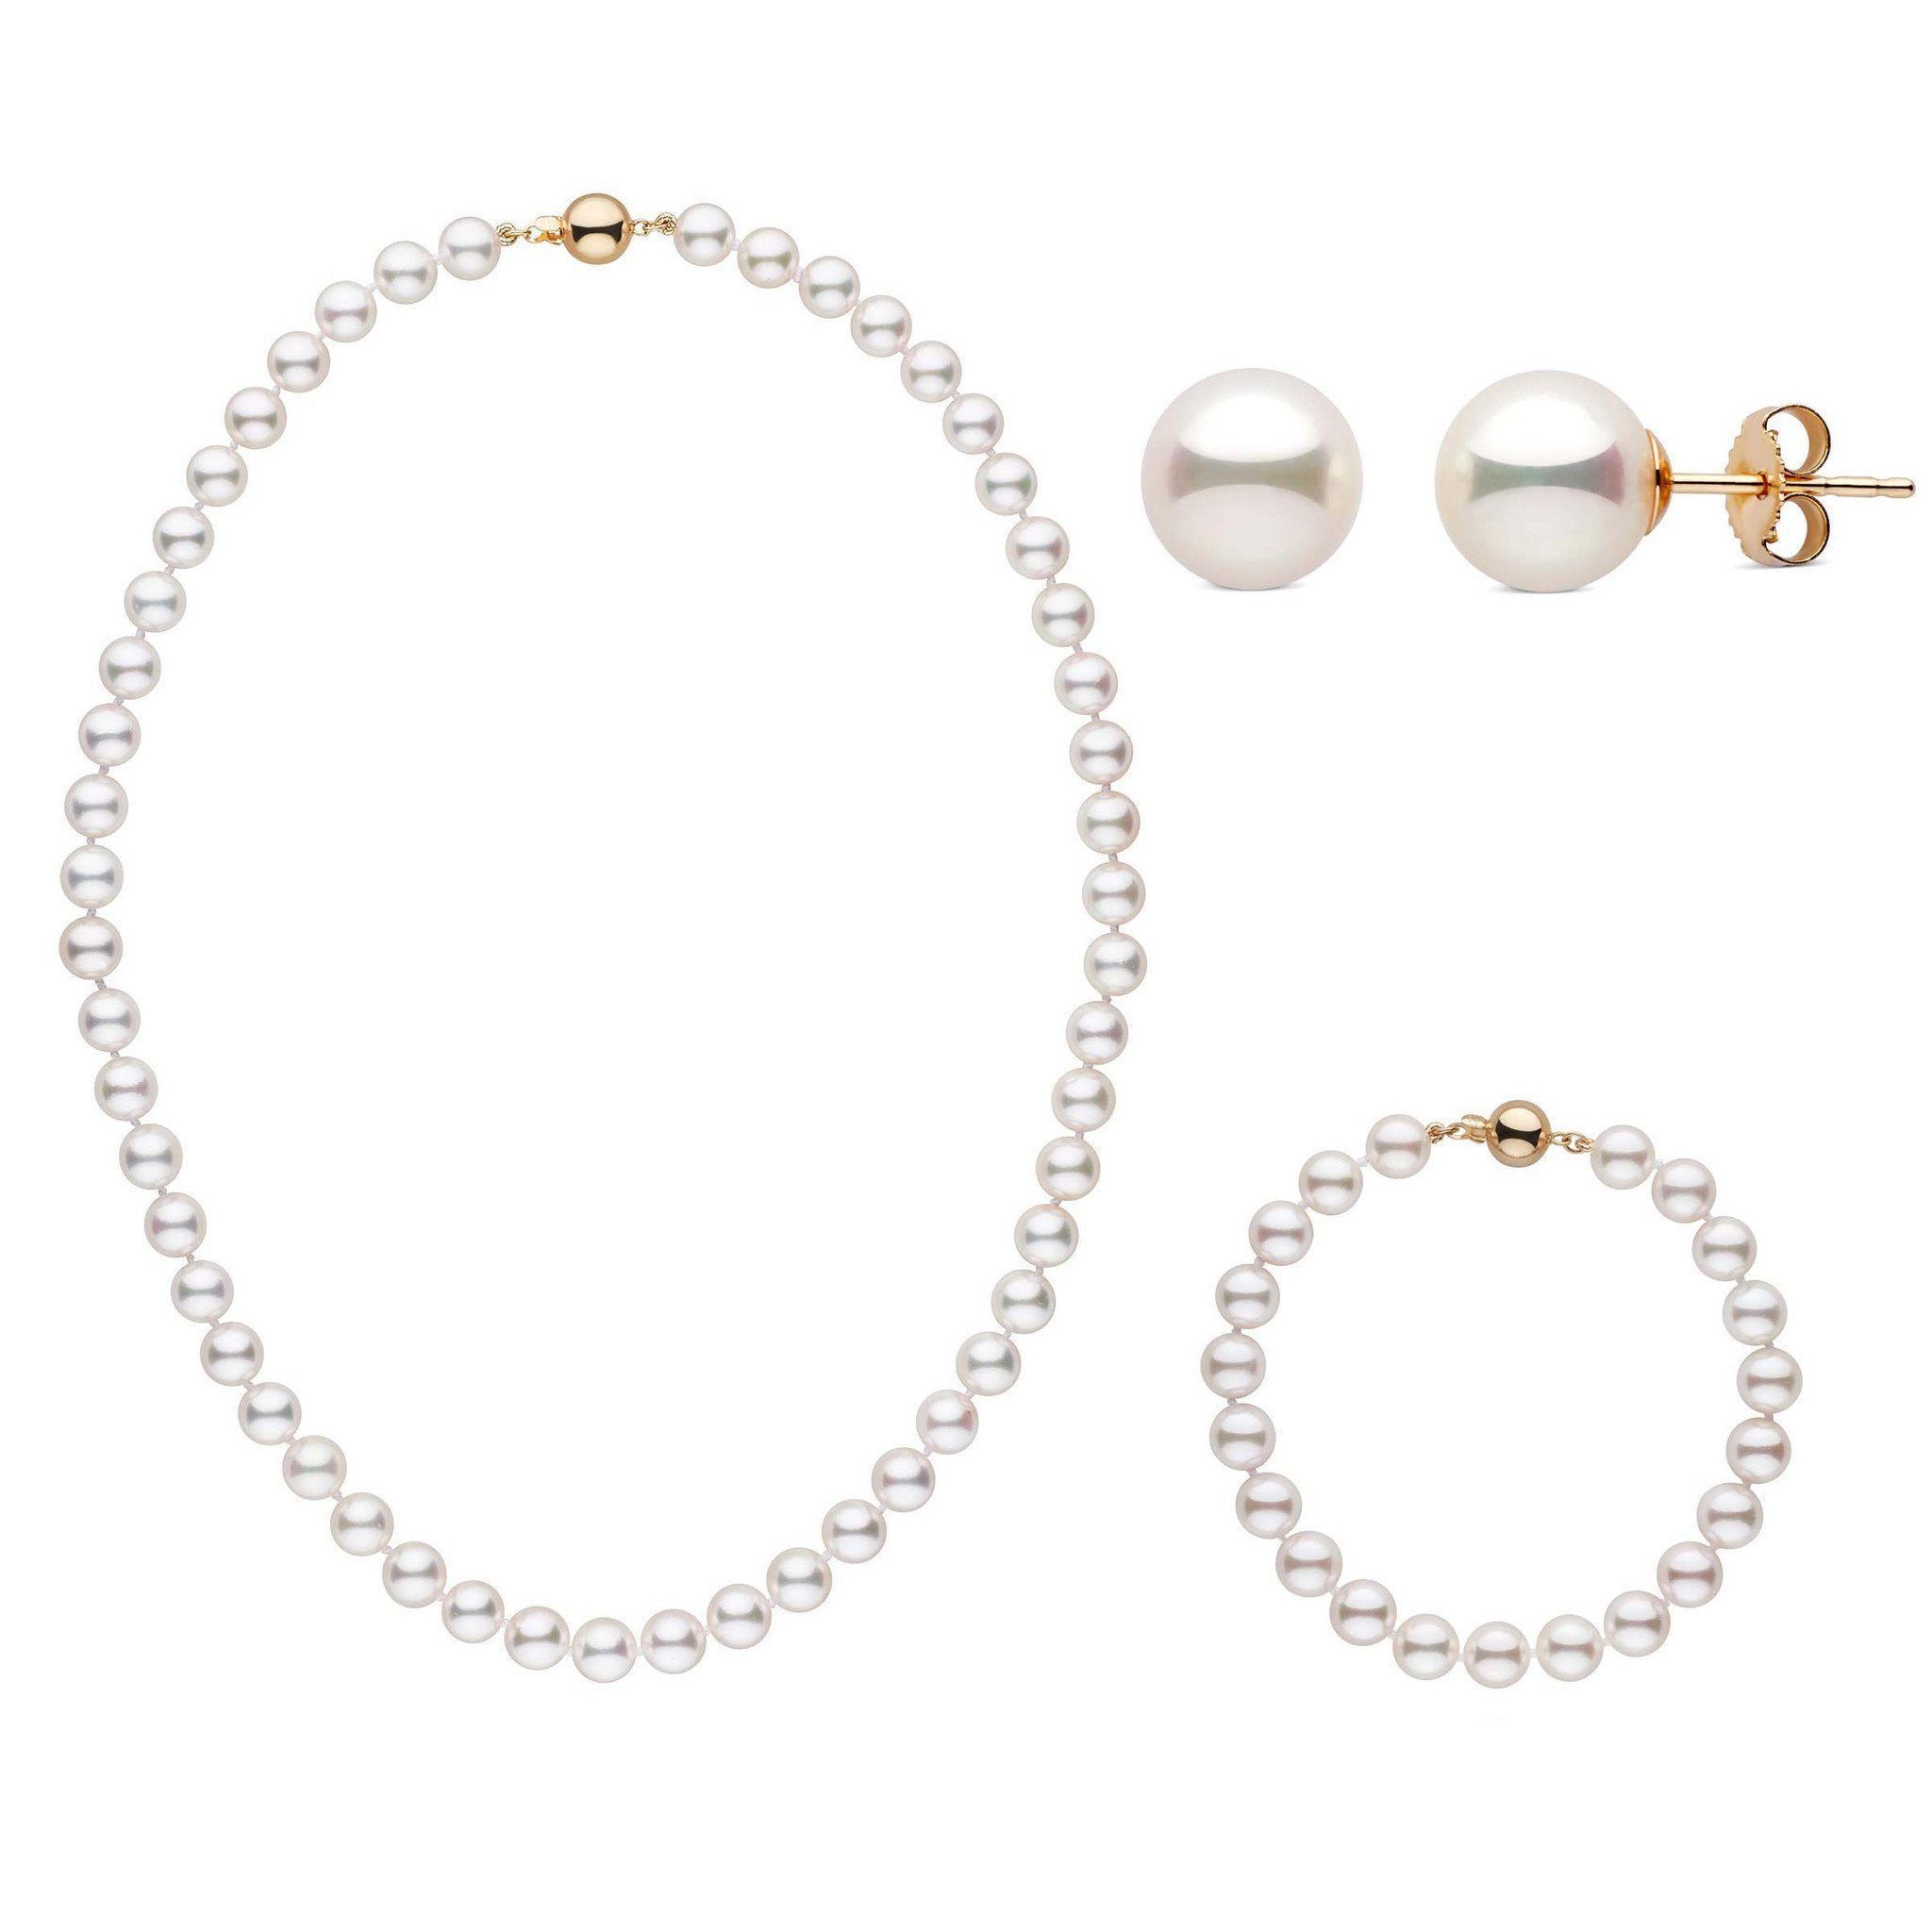 16 Inch 3 Piece Set of 7.5-8.0 mm AAA White Akoya Pearls Yellow Gold